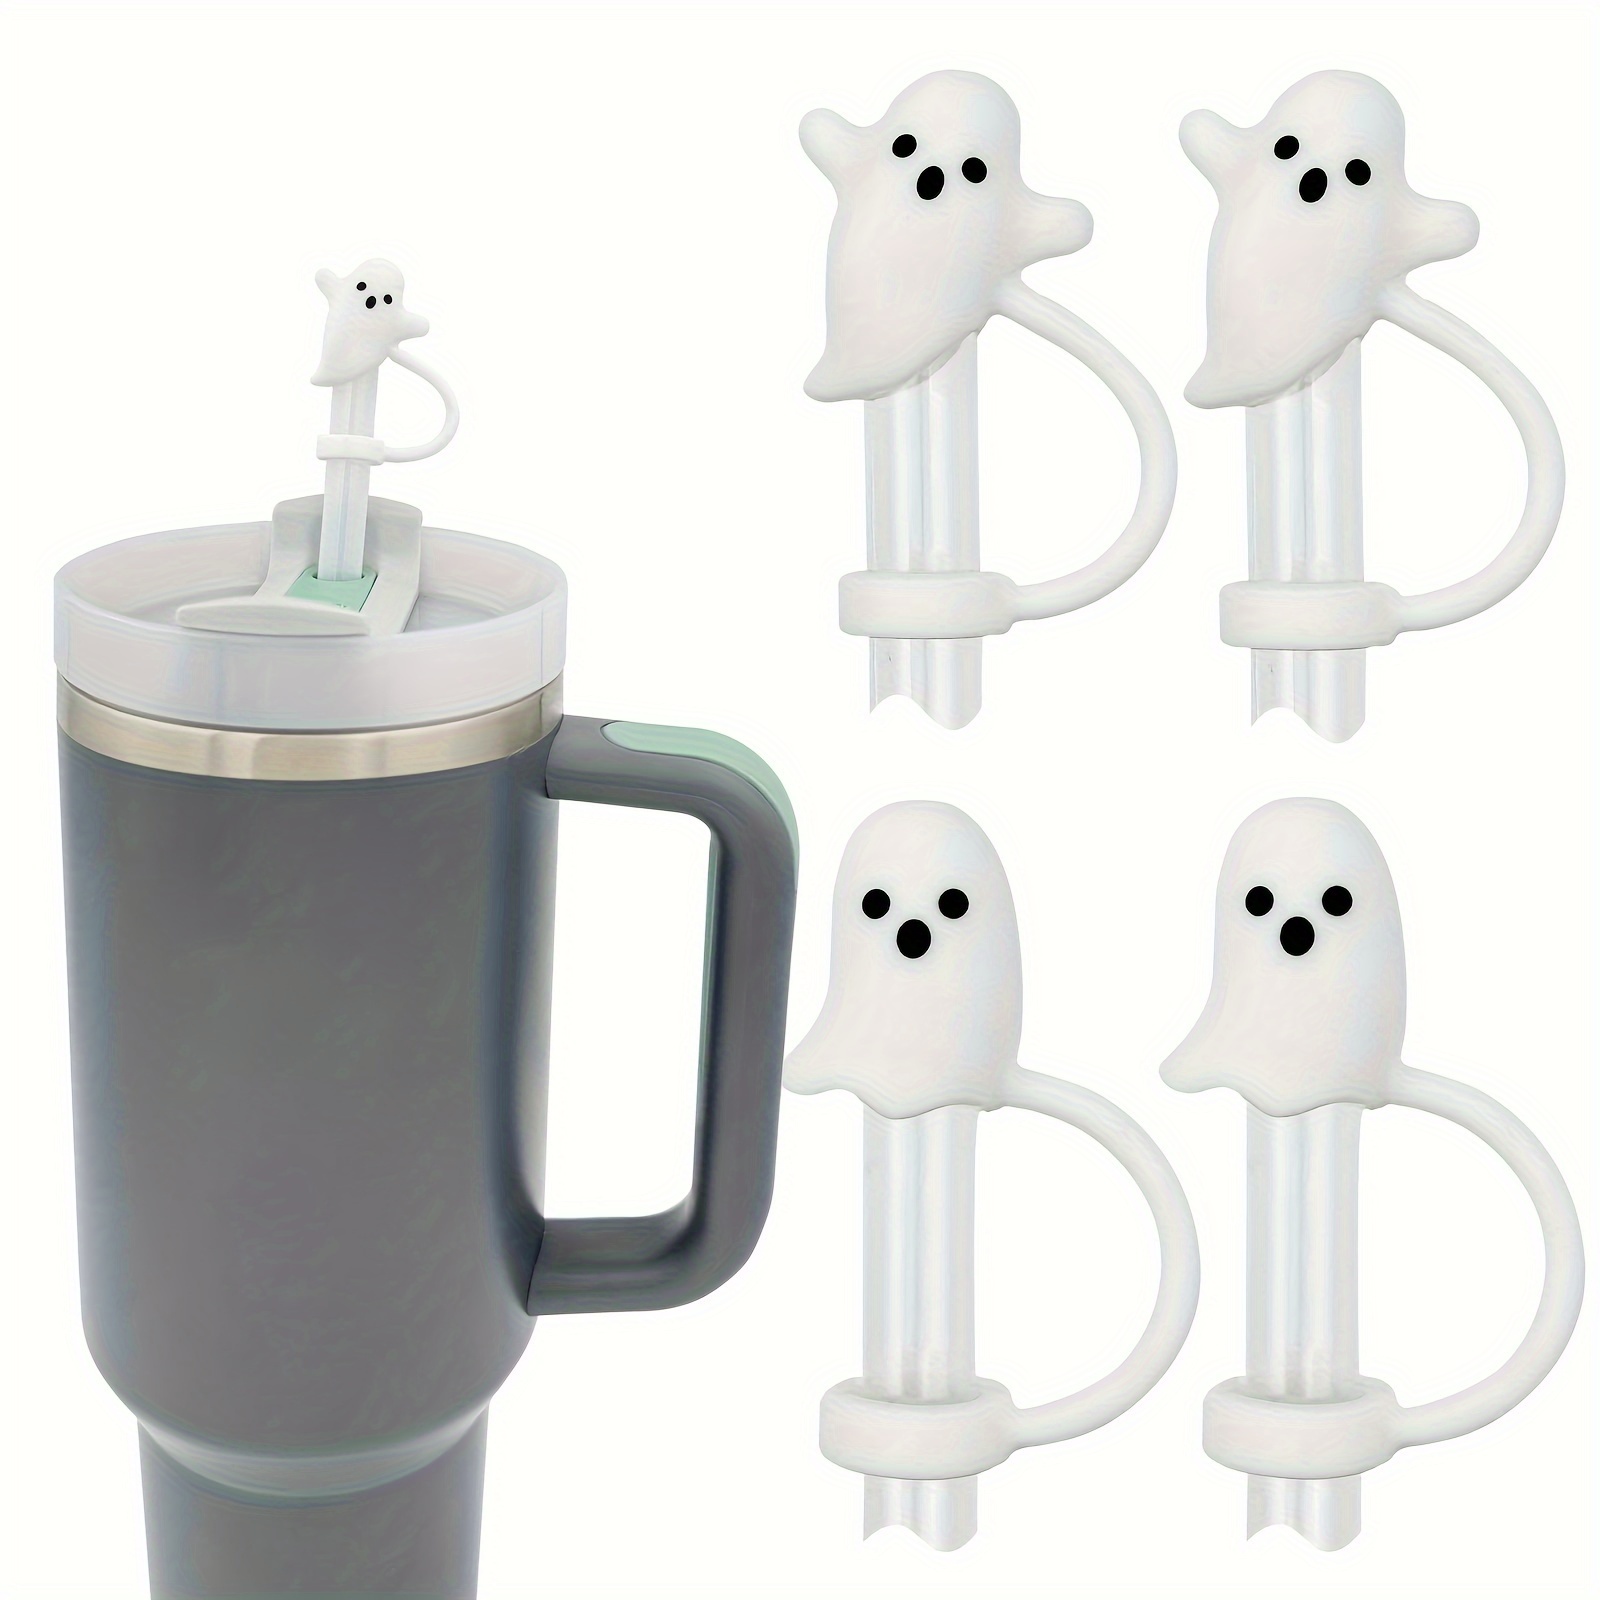 

4-piece Cute Ghost Silicone Straw Covers For Stanley Cups 30/40oz - Reusable Drinking Straw Toppers, Includes 2 Styles, Perfect Halloween Gift & Fun Tumbler Accessory